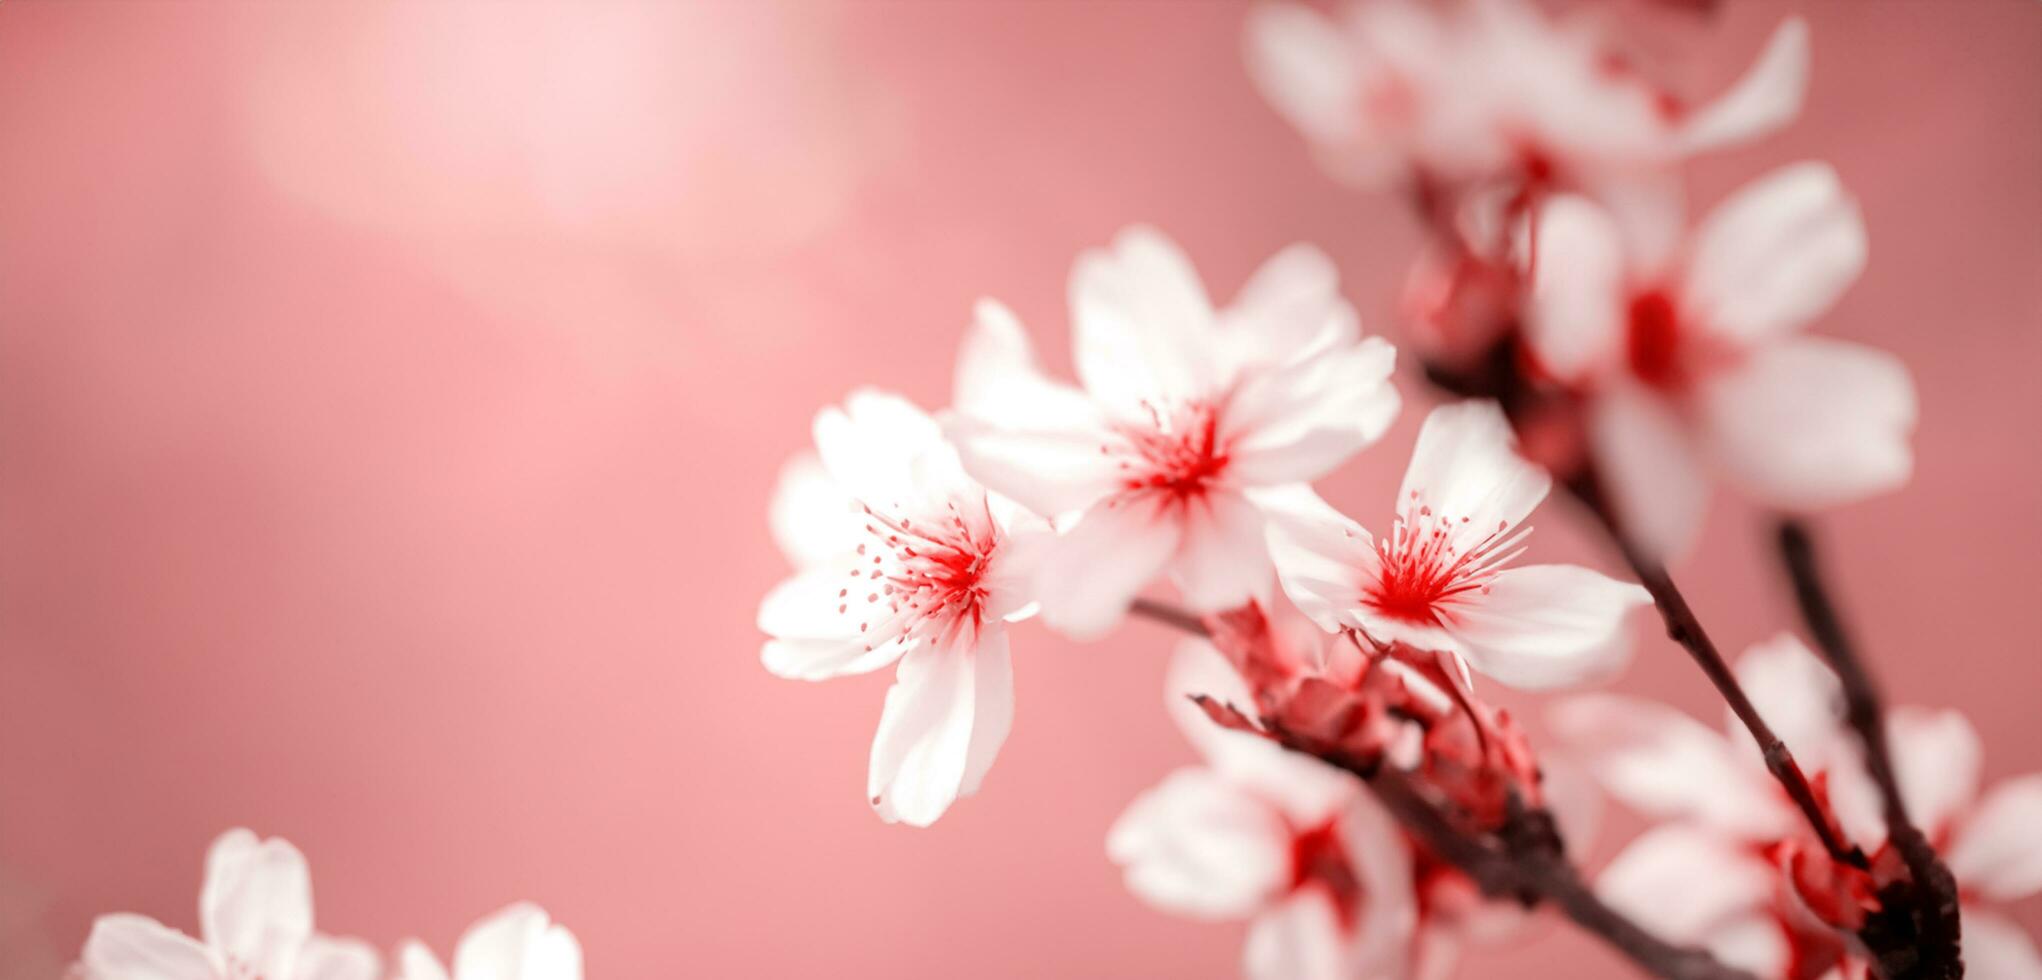 Bright background of cherry blossoms nature in japan photo